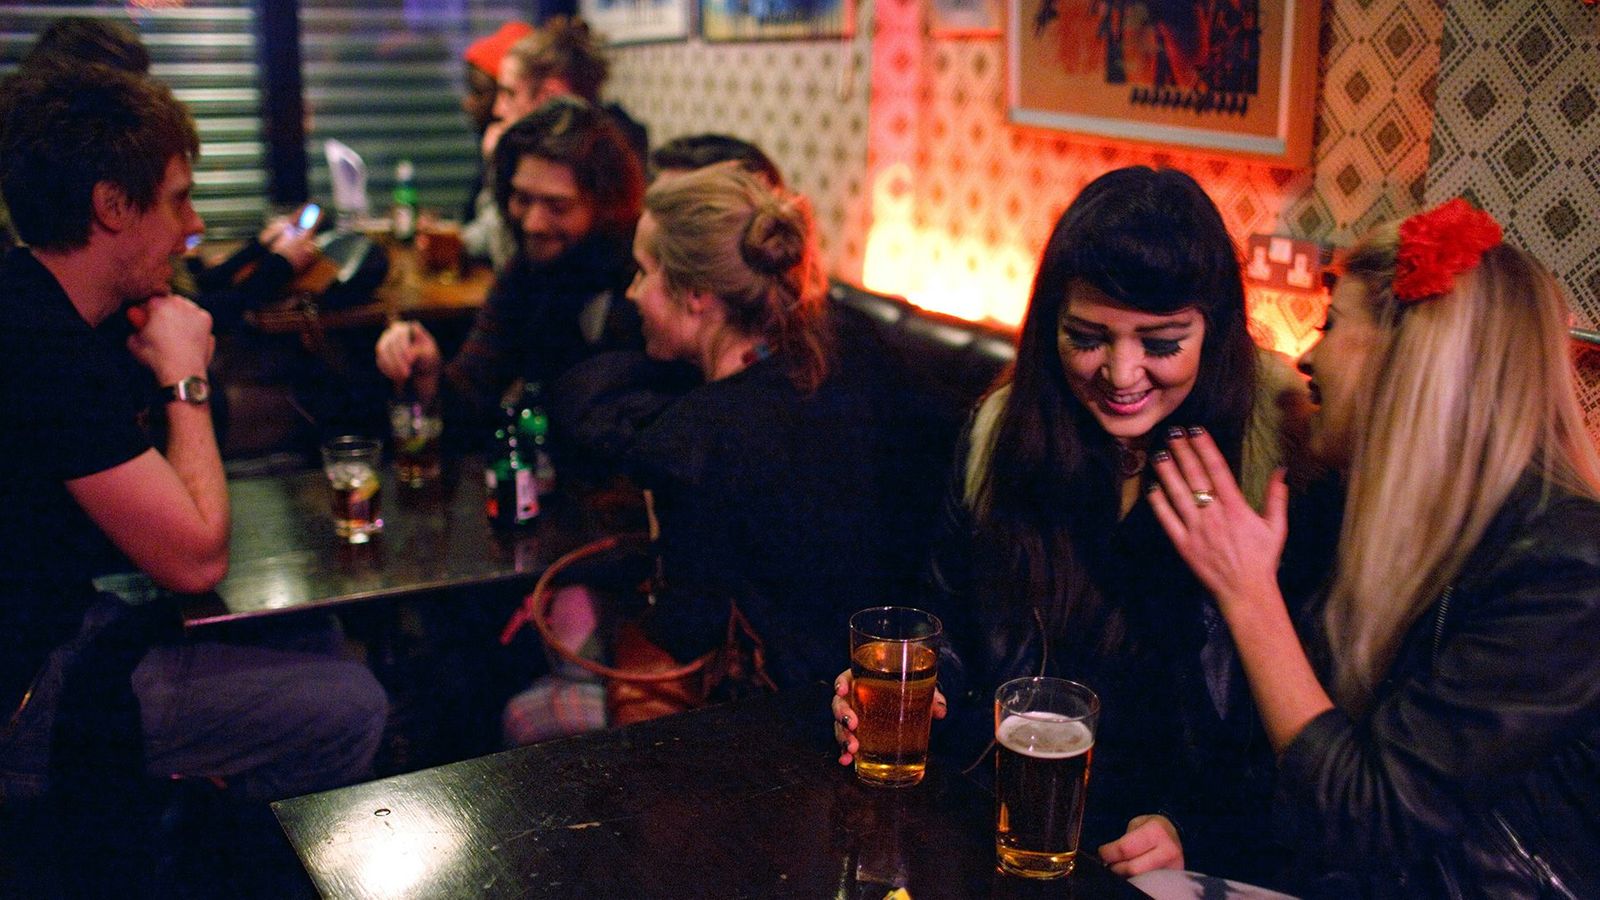 Hot drinking chicks. British drinking Culture. Carrying Drinks in a British pub.